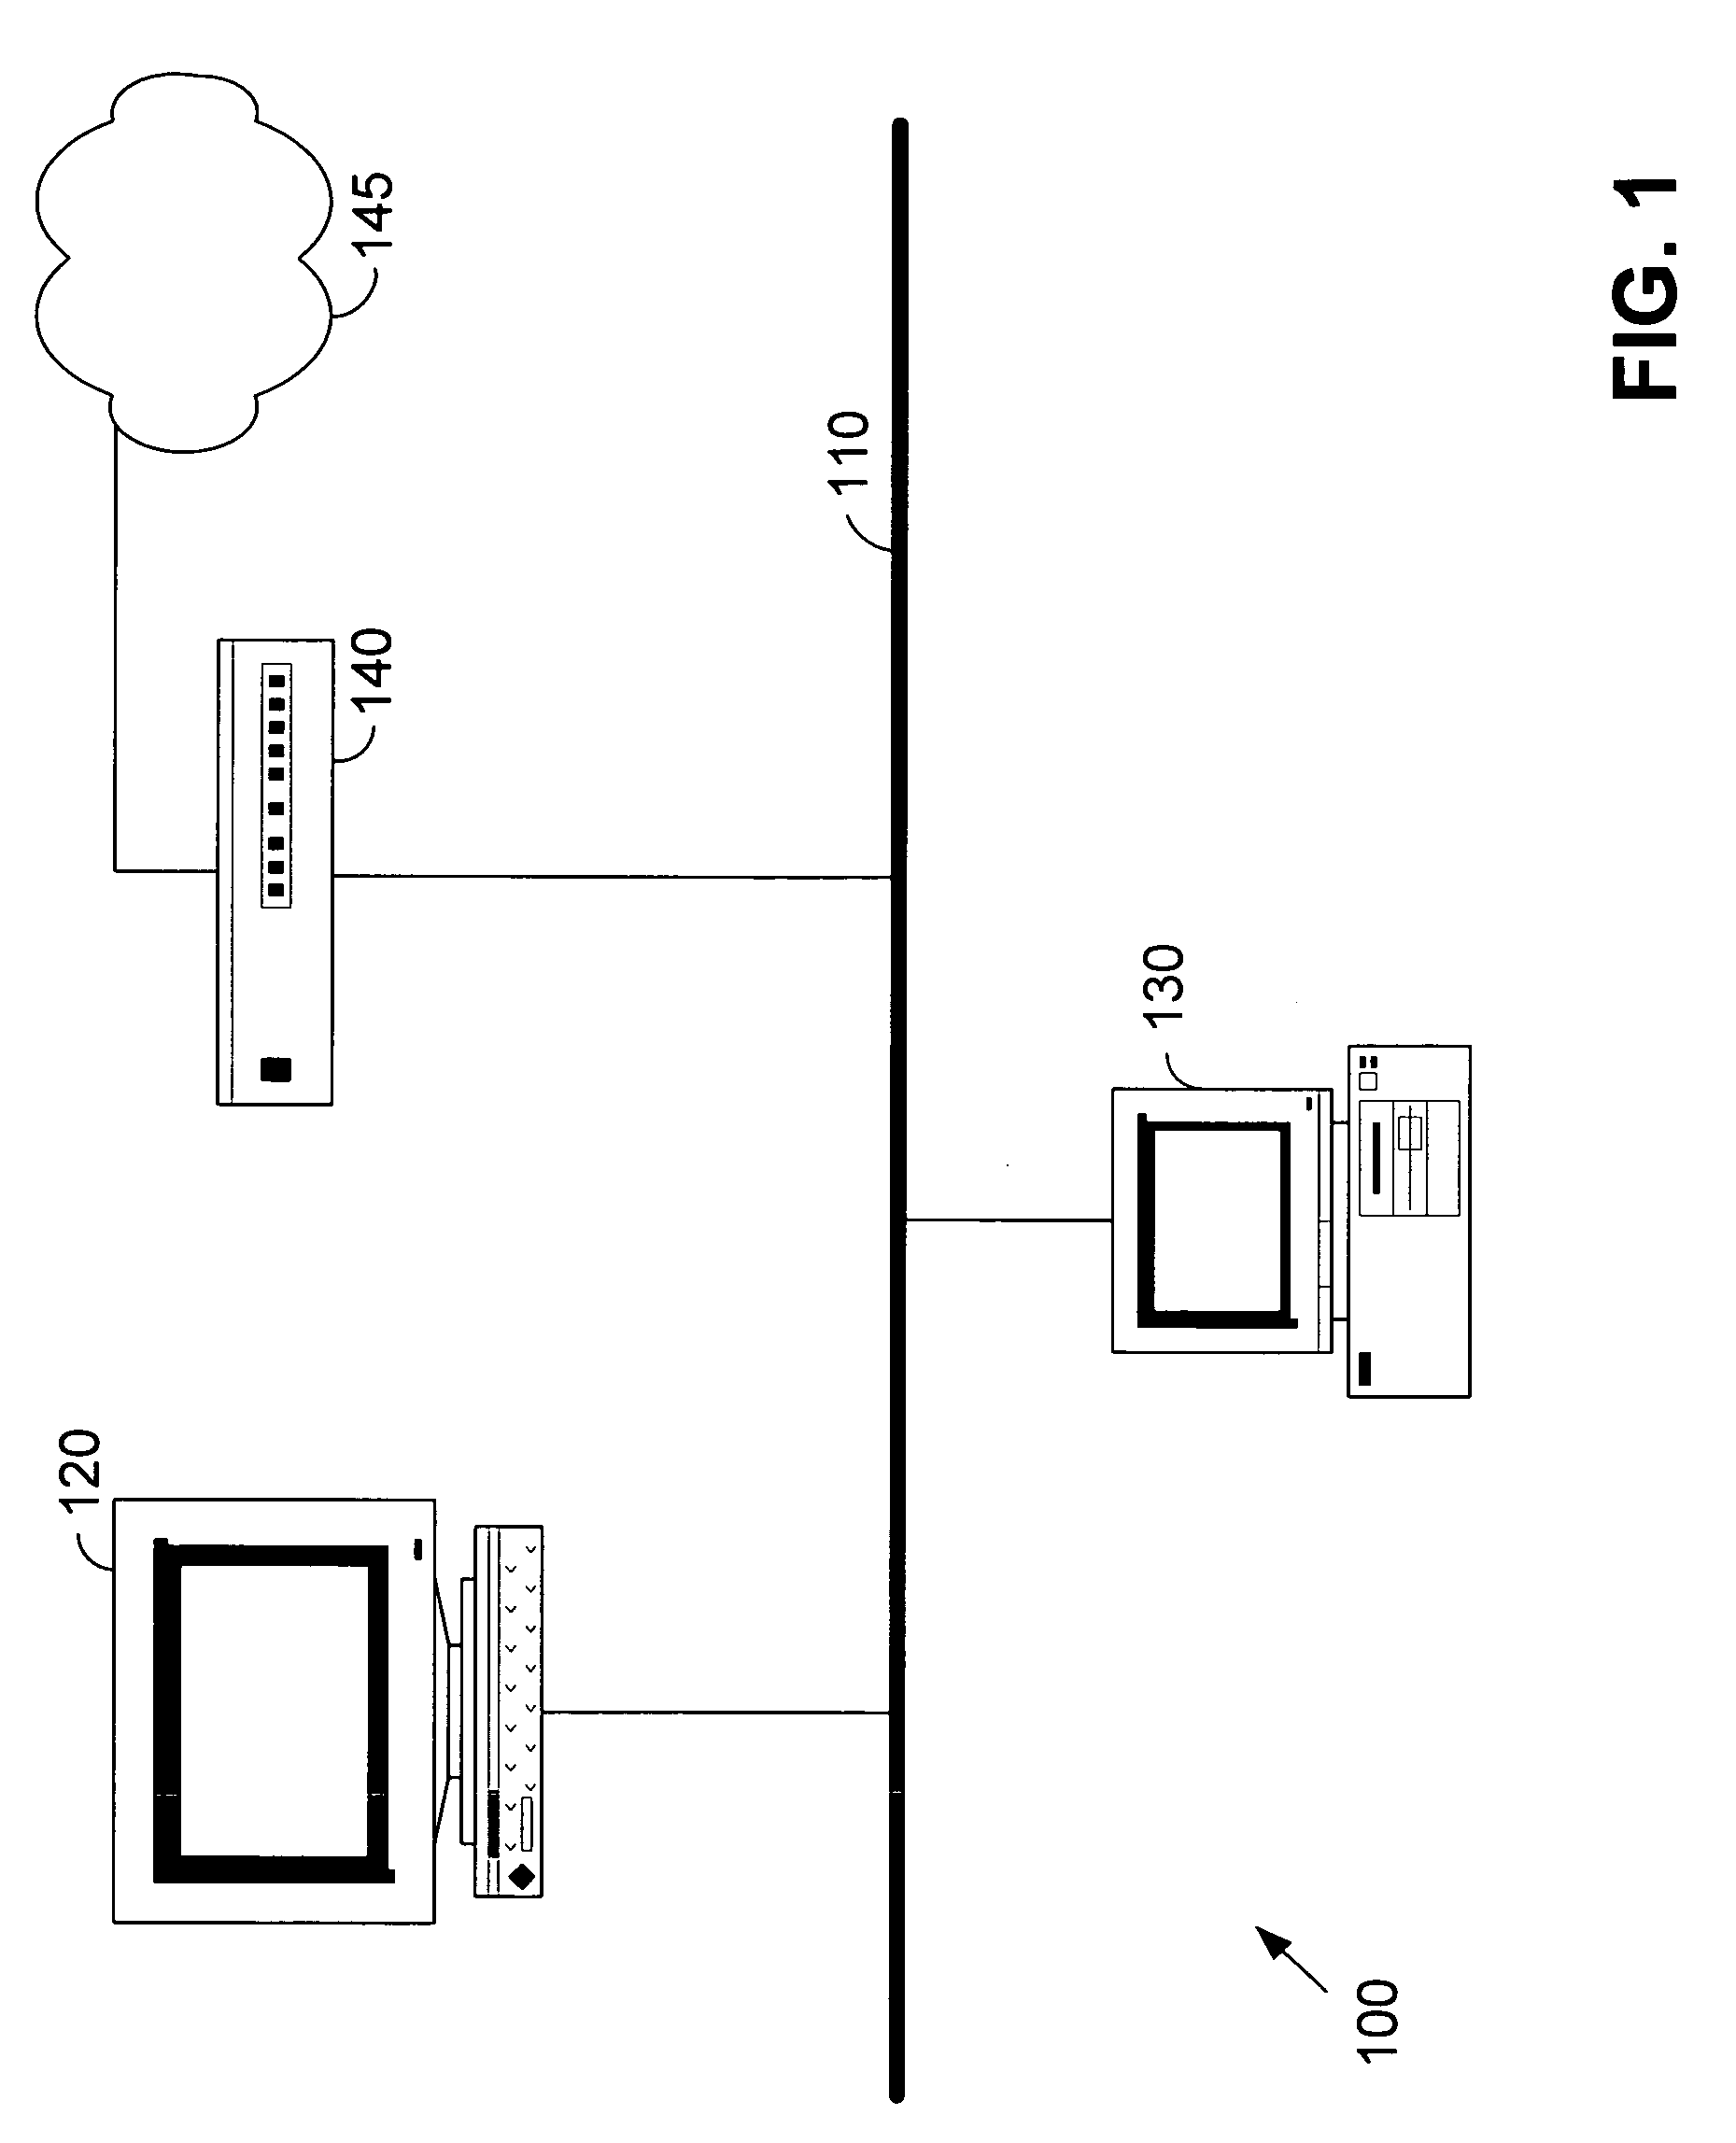 Method and apparatus for performing wire speed auto-negotiation